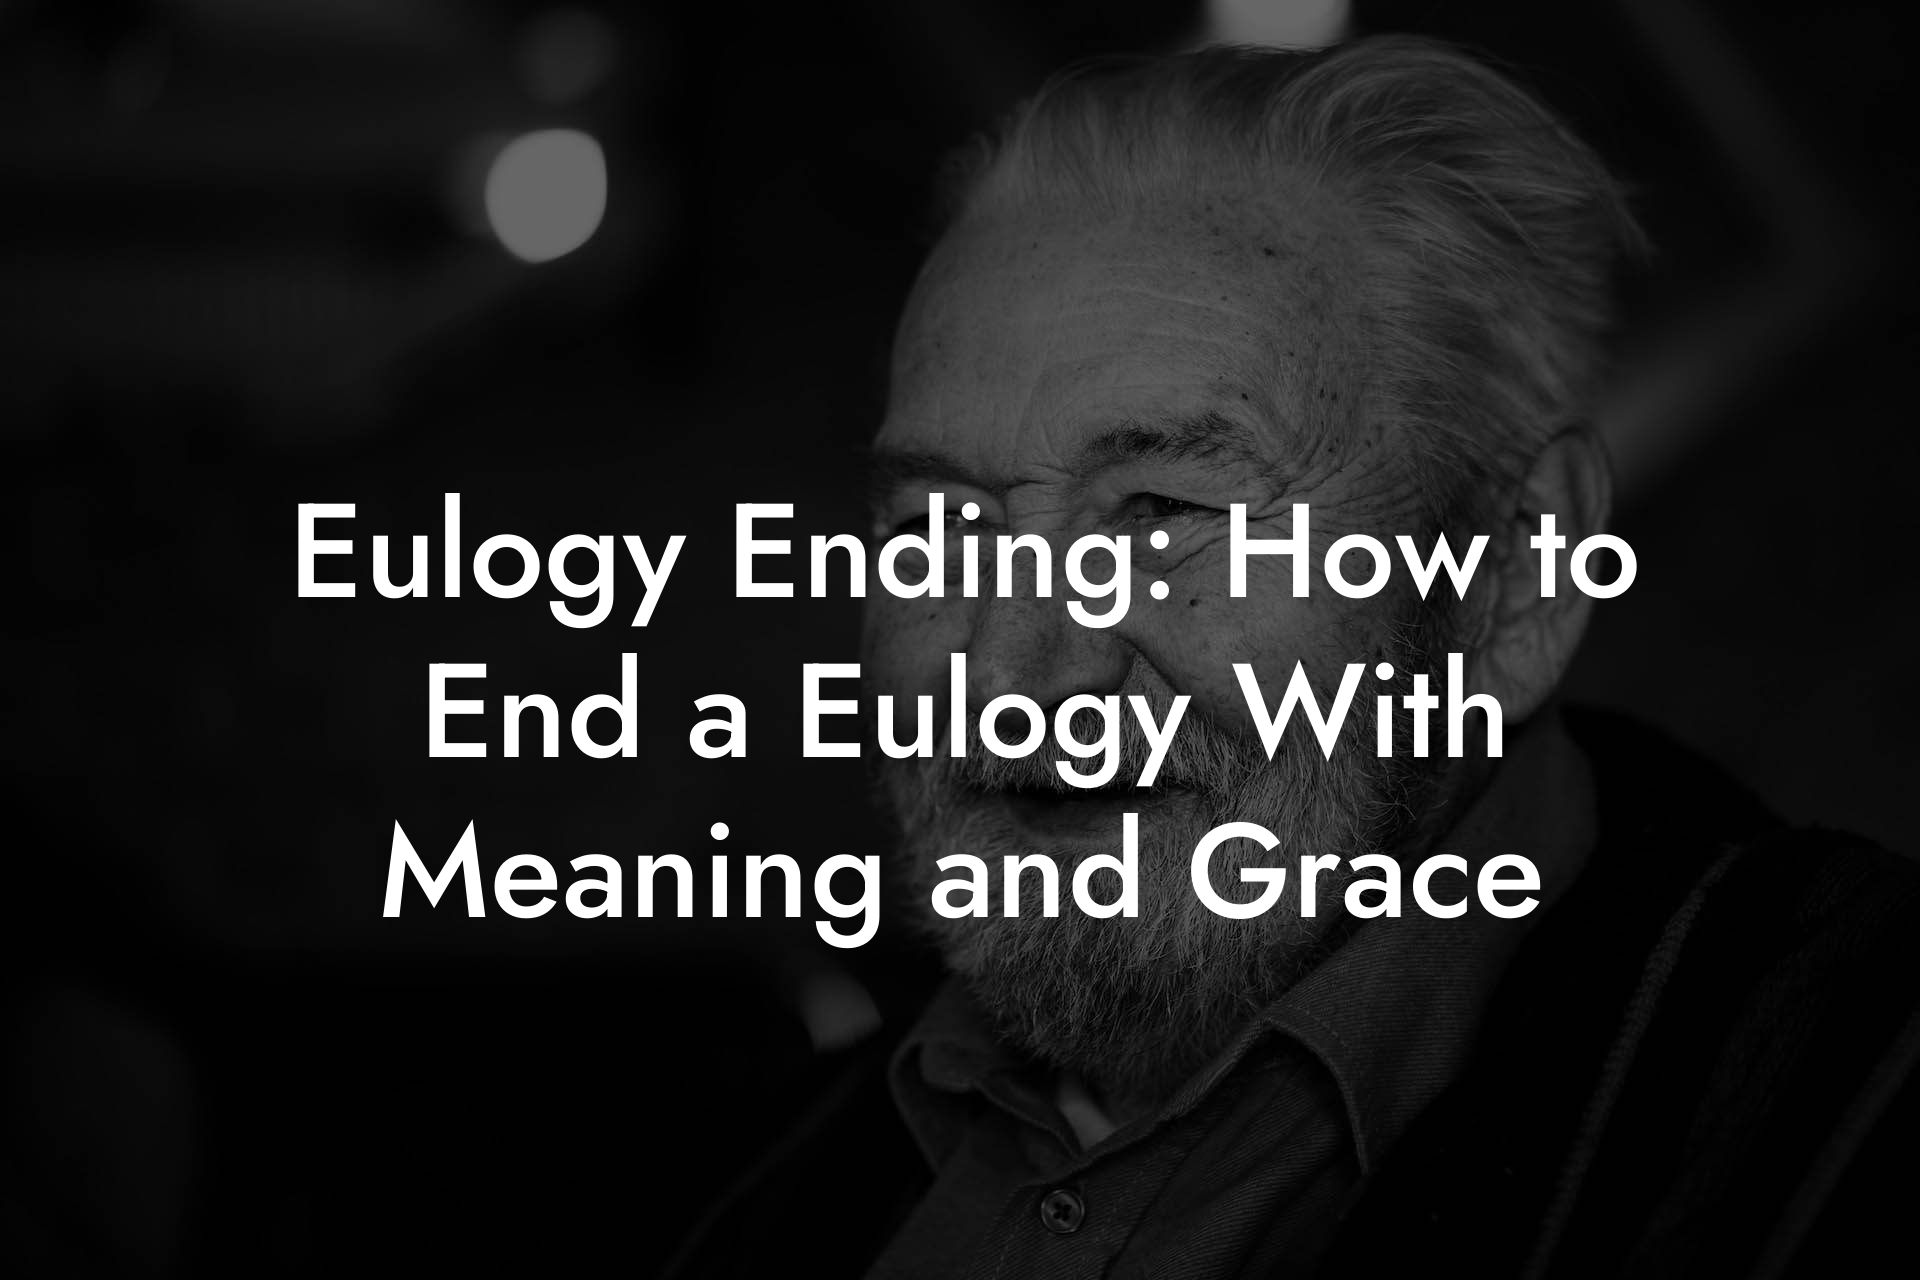 Eulogy Ending: How to End a Eulogy With Meaning and Grace